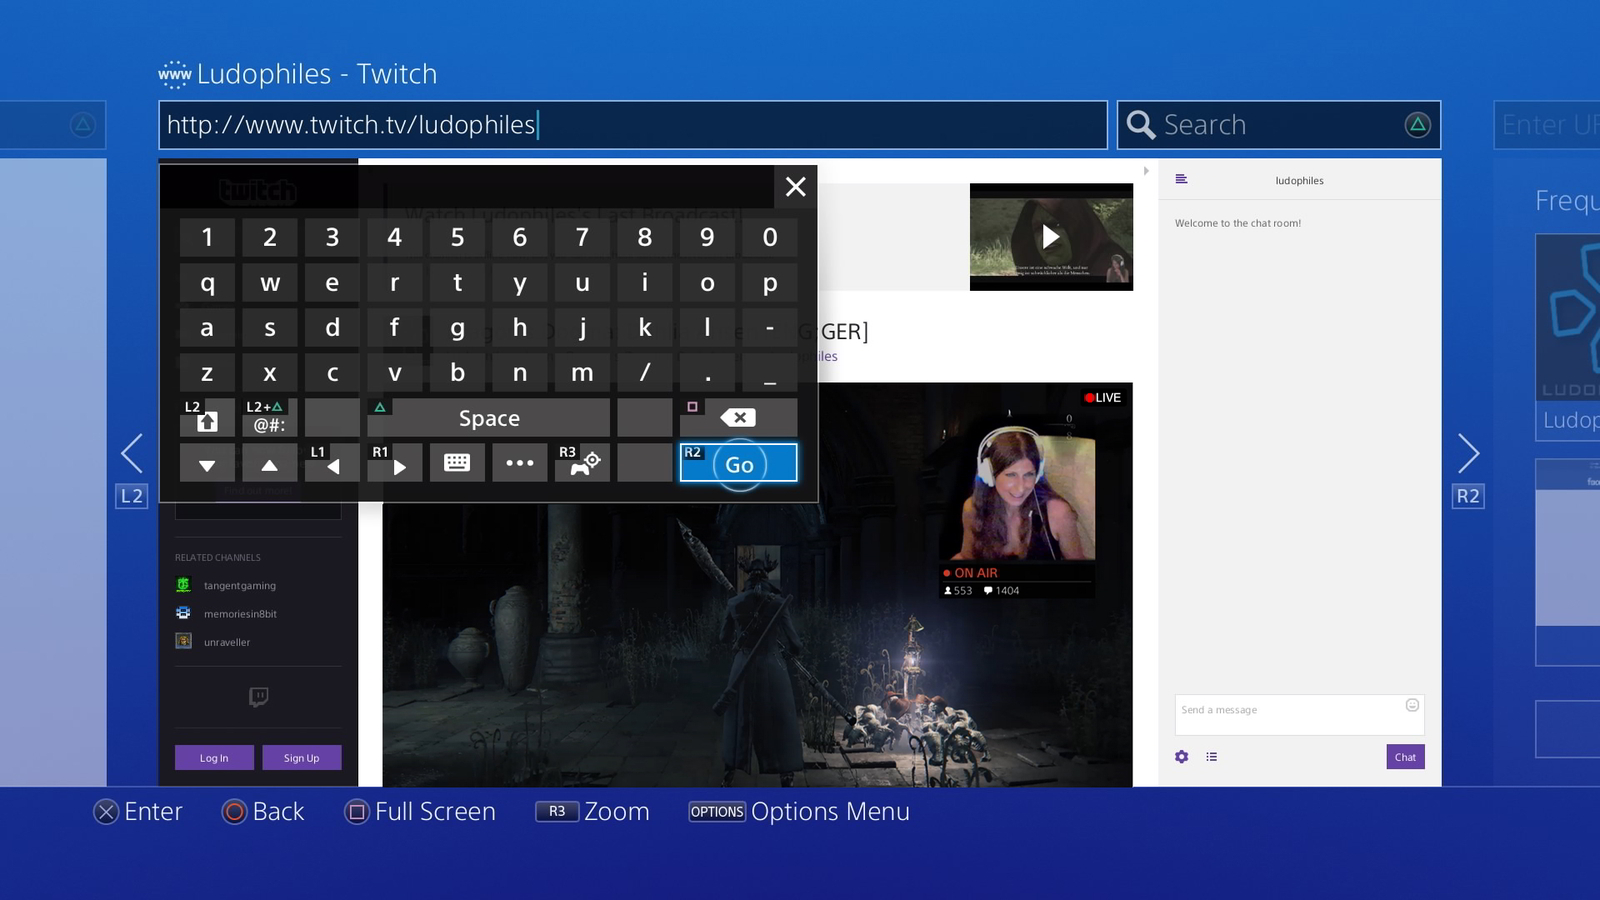 How To Watch Twitch Live Streams In Ps4 Browser Ludophiles Beta